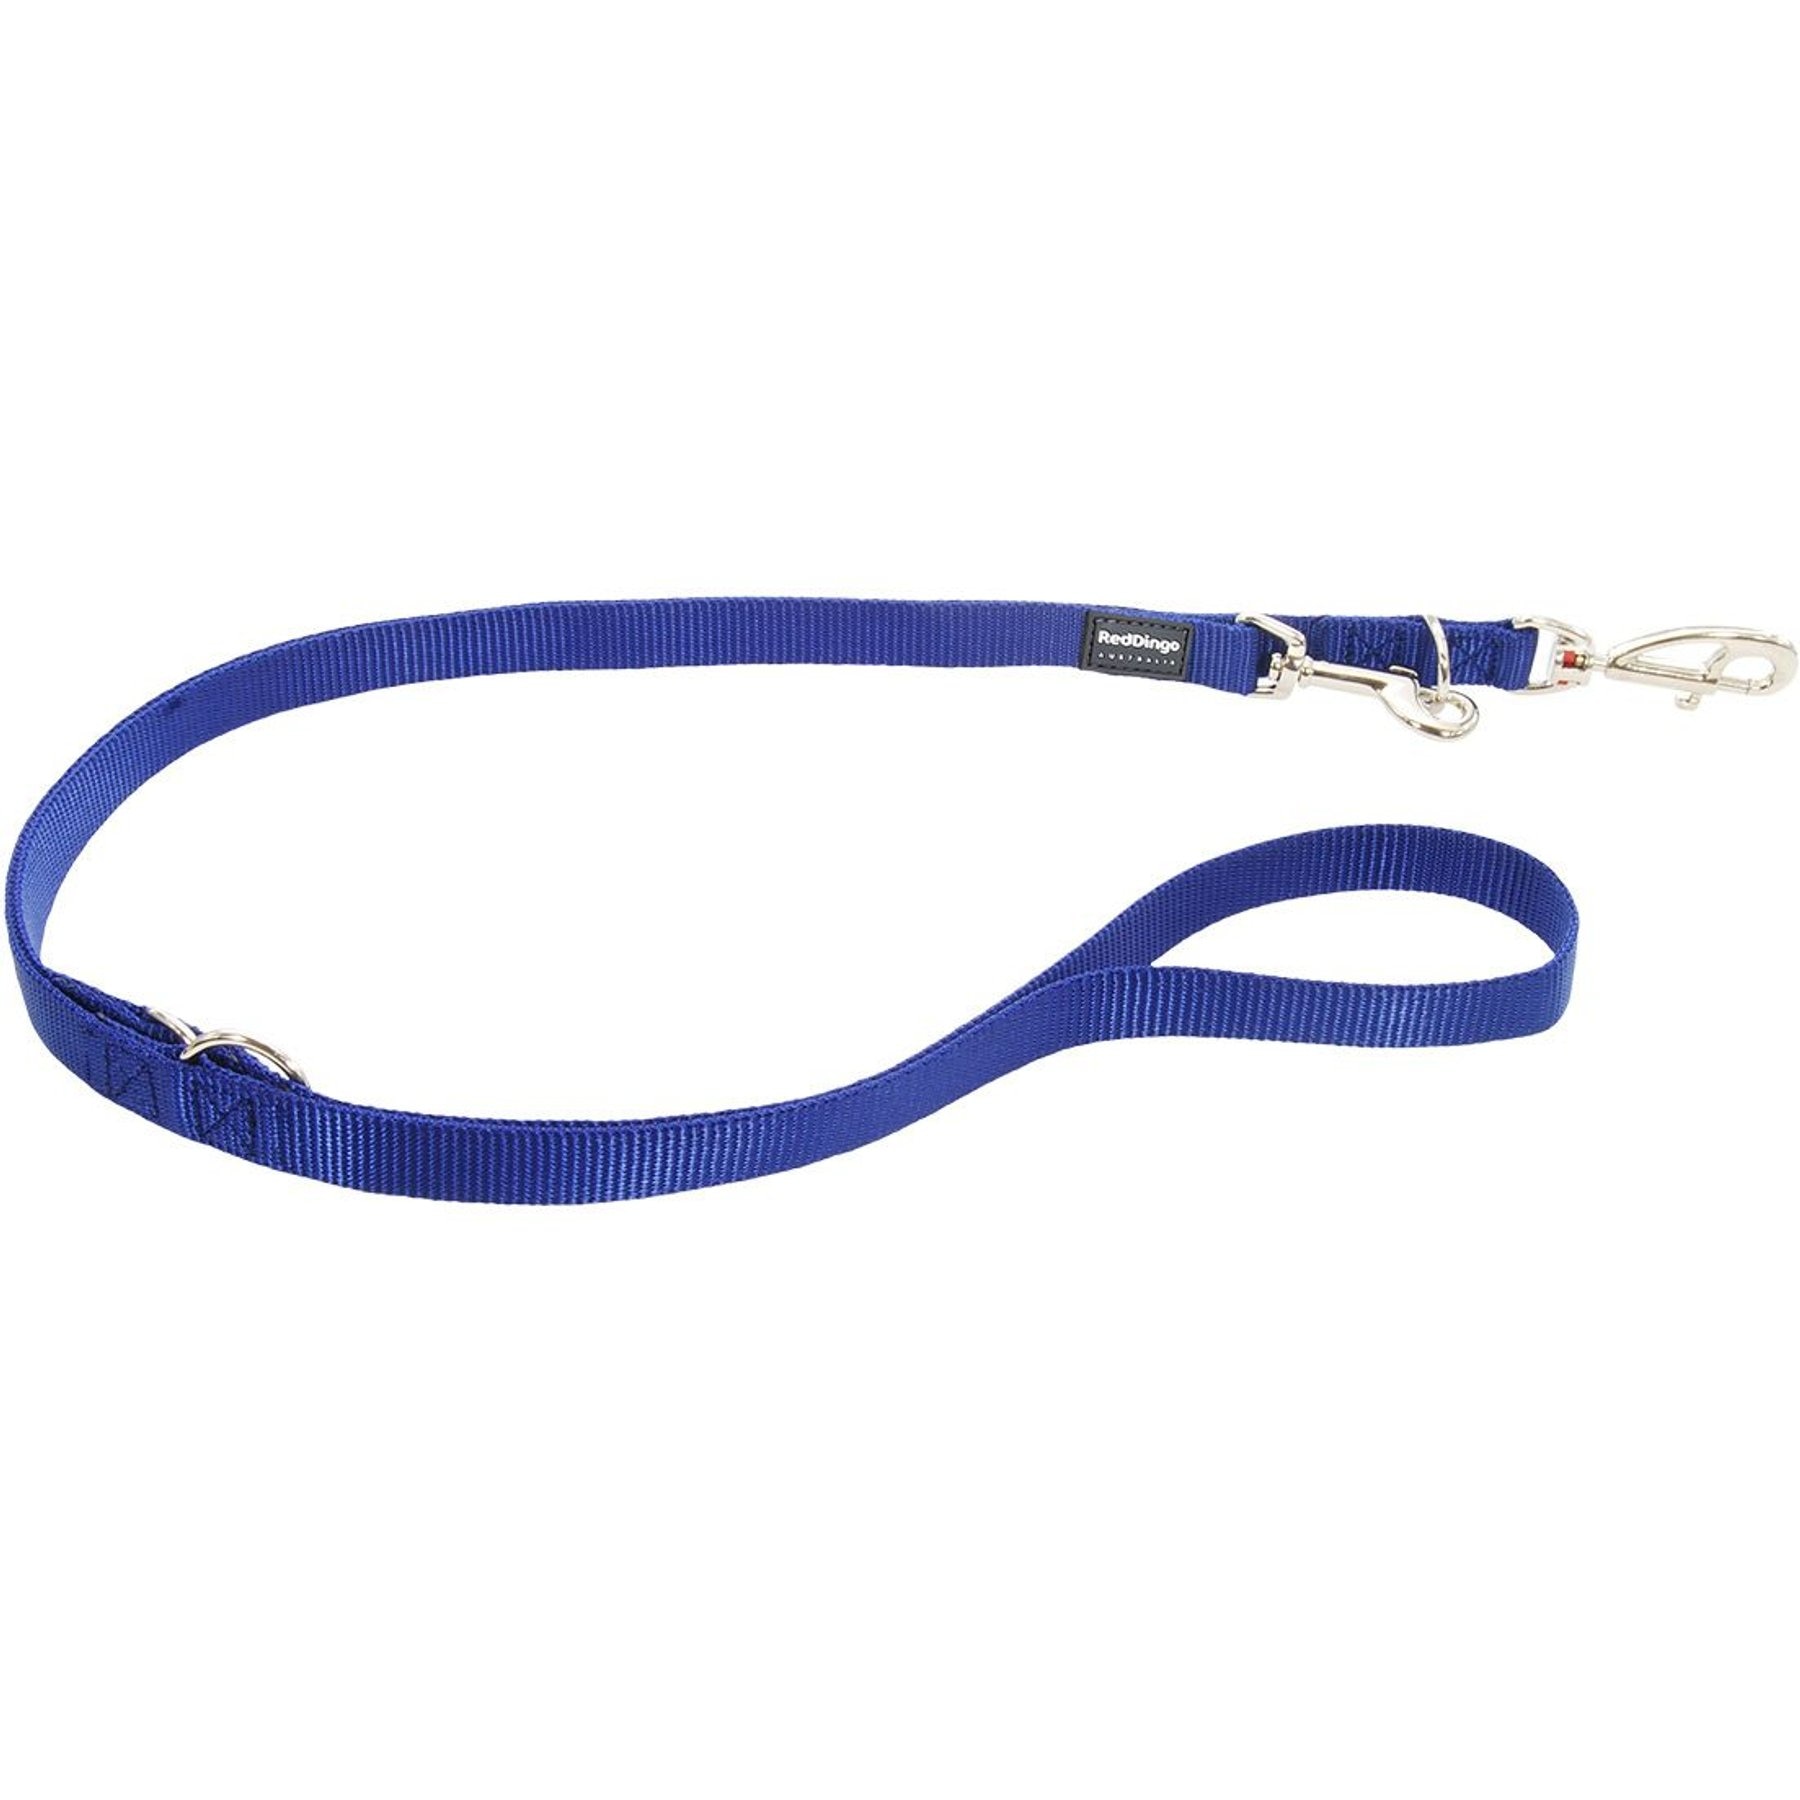 Nylon Dog Lead 3 Sizes Dog Leash Carabiner Easy Fix Clip Strong FREE P&P